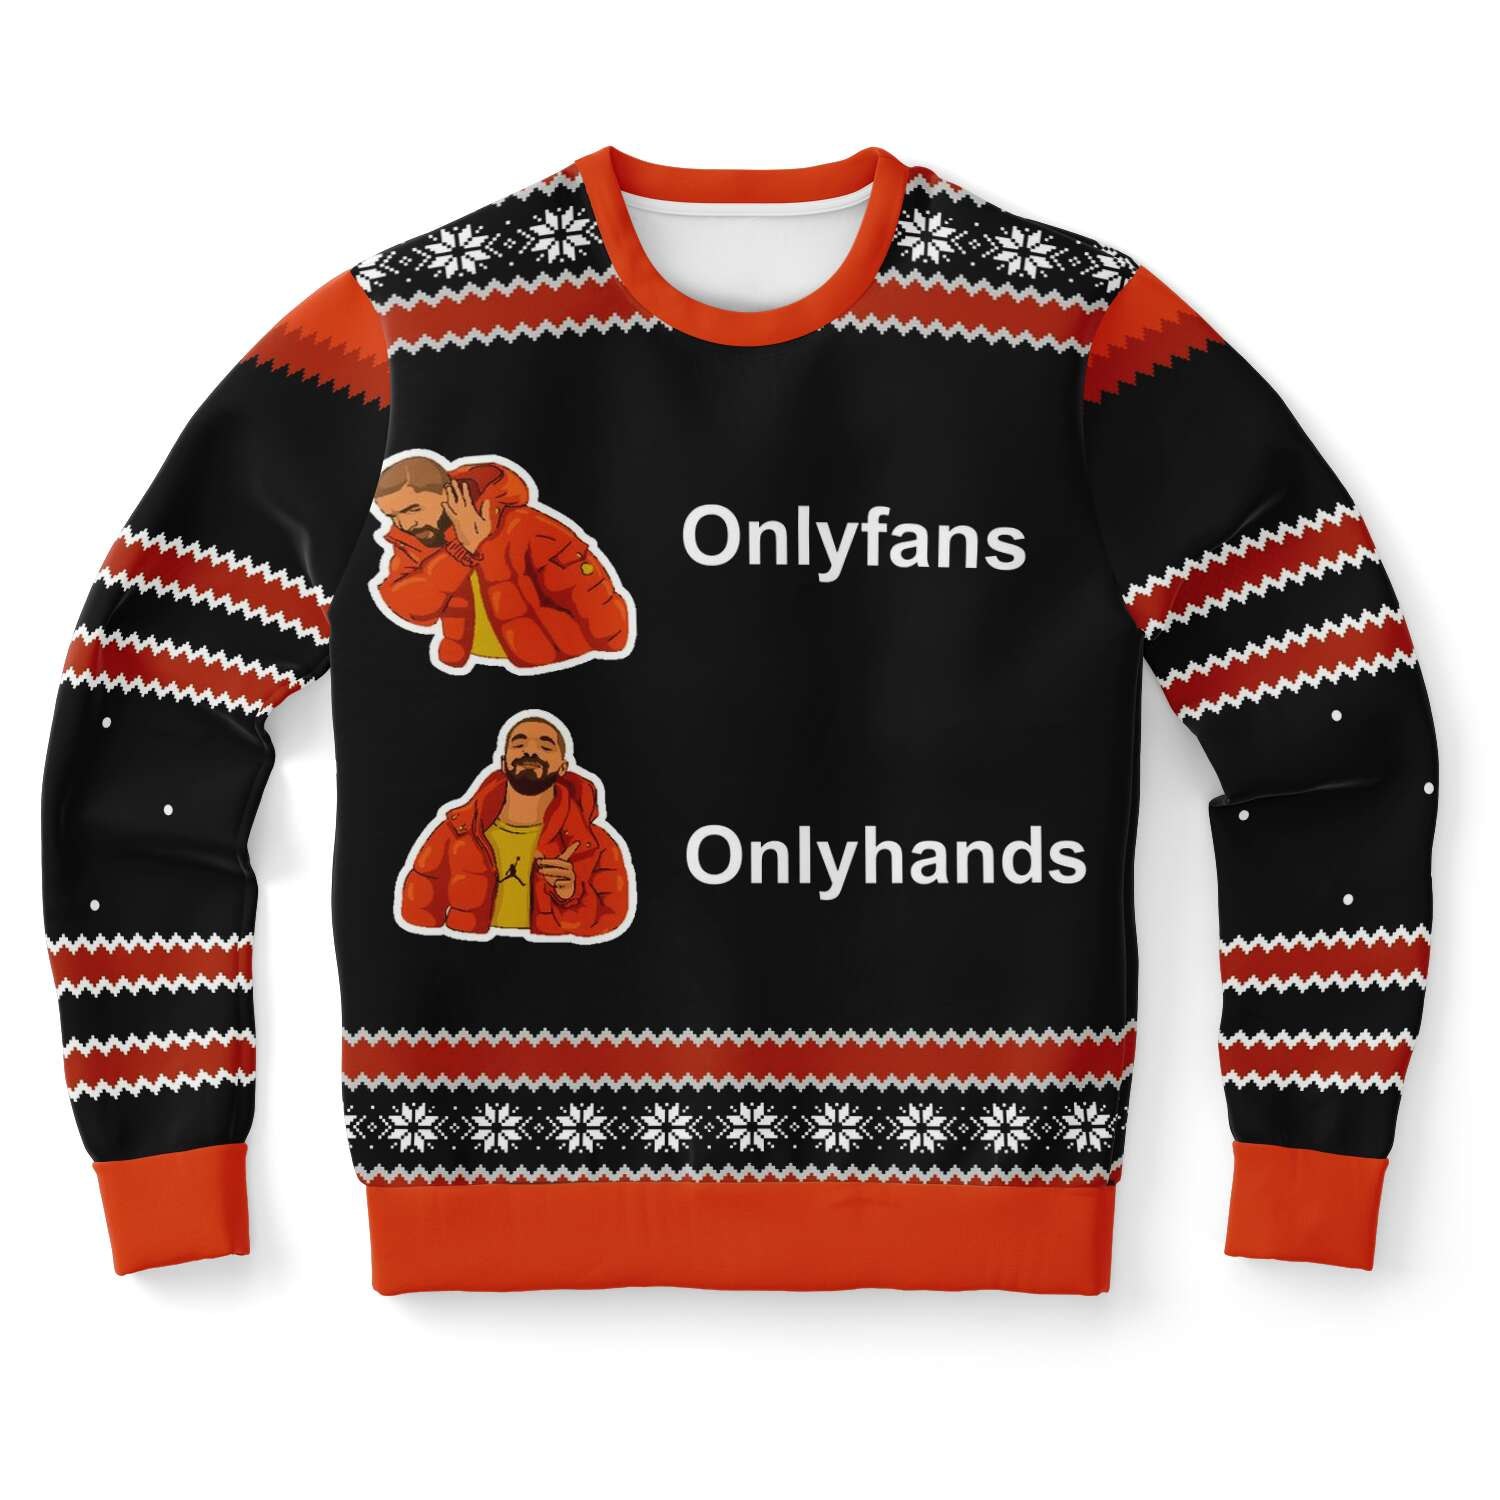 Onlyfans-Onlyhands Christmas Ugly Sweater